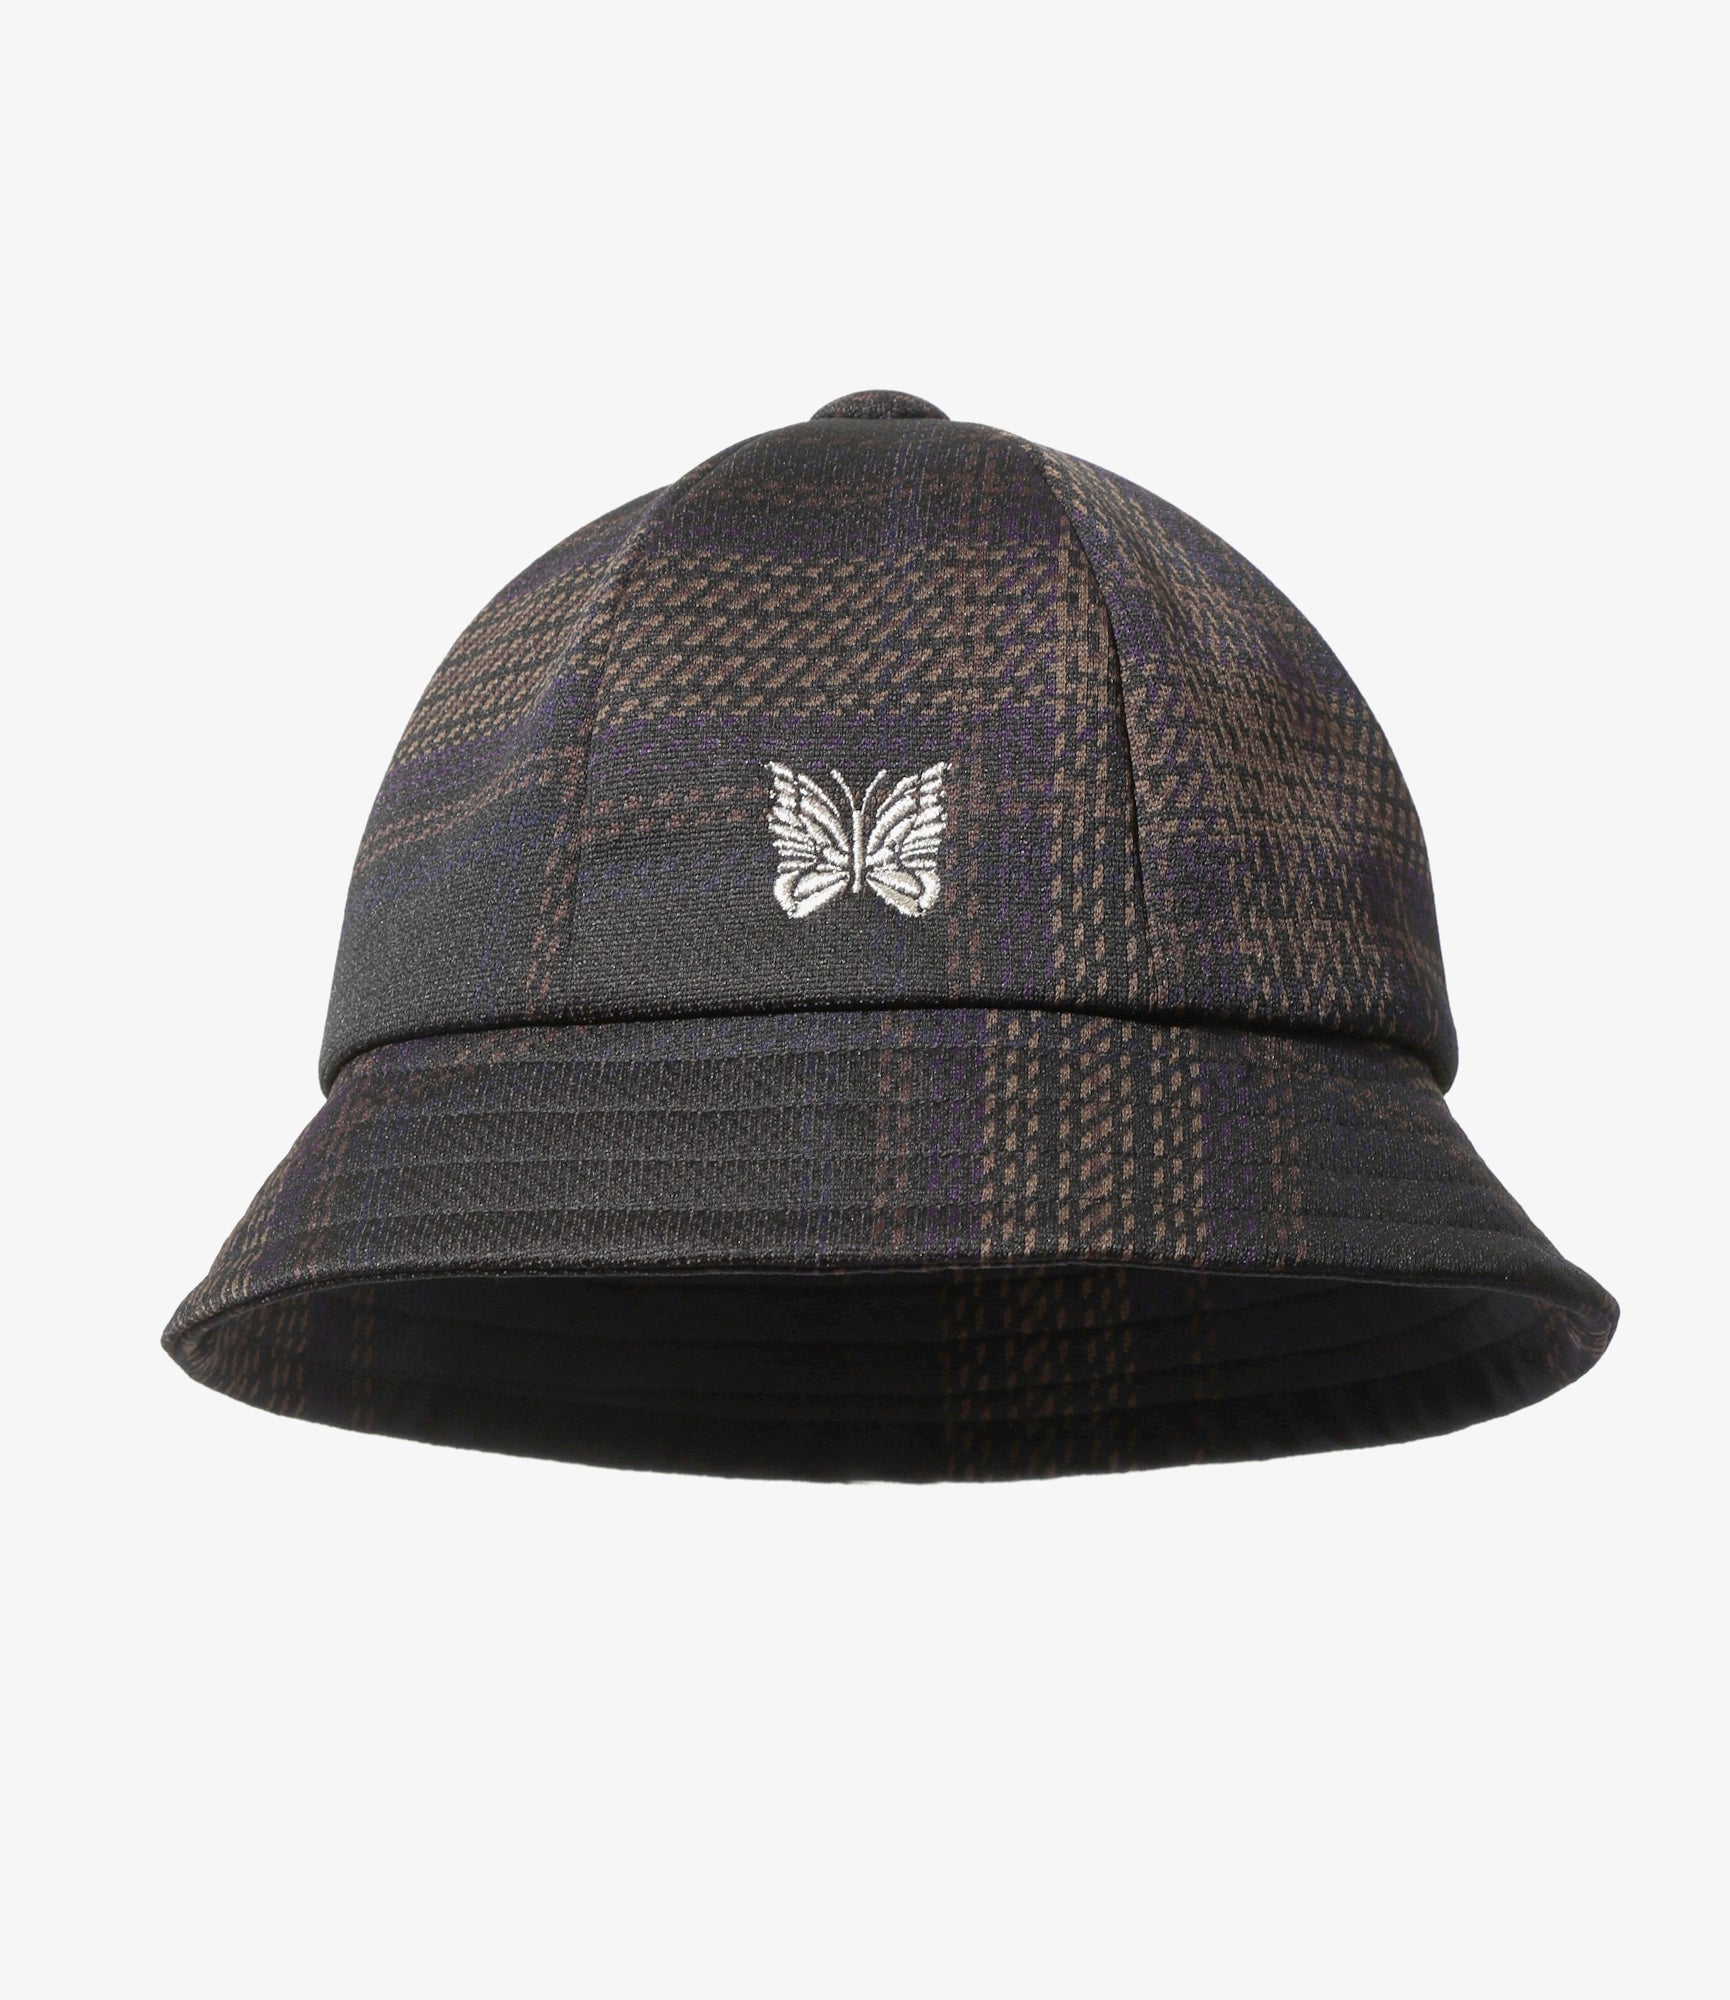 Hats | Nepenthes London